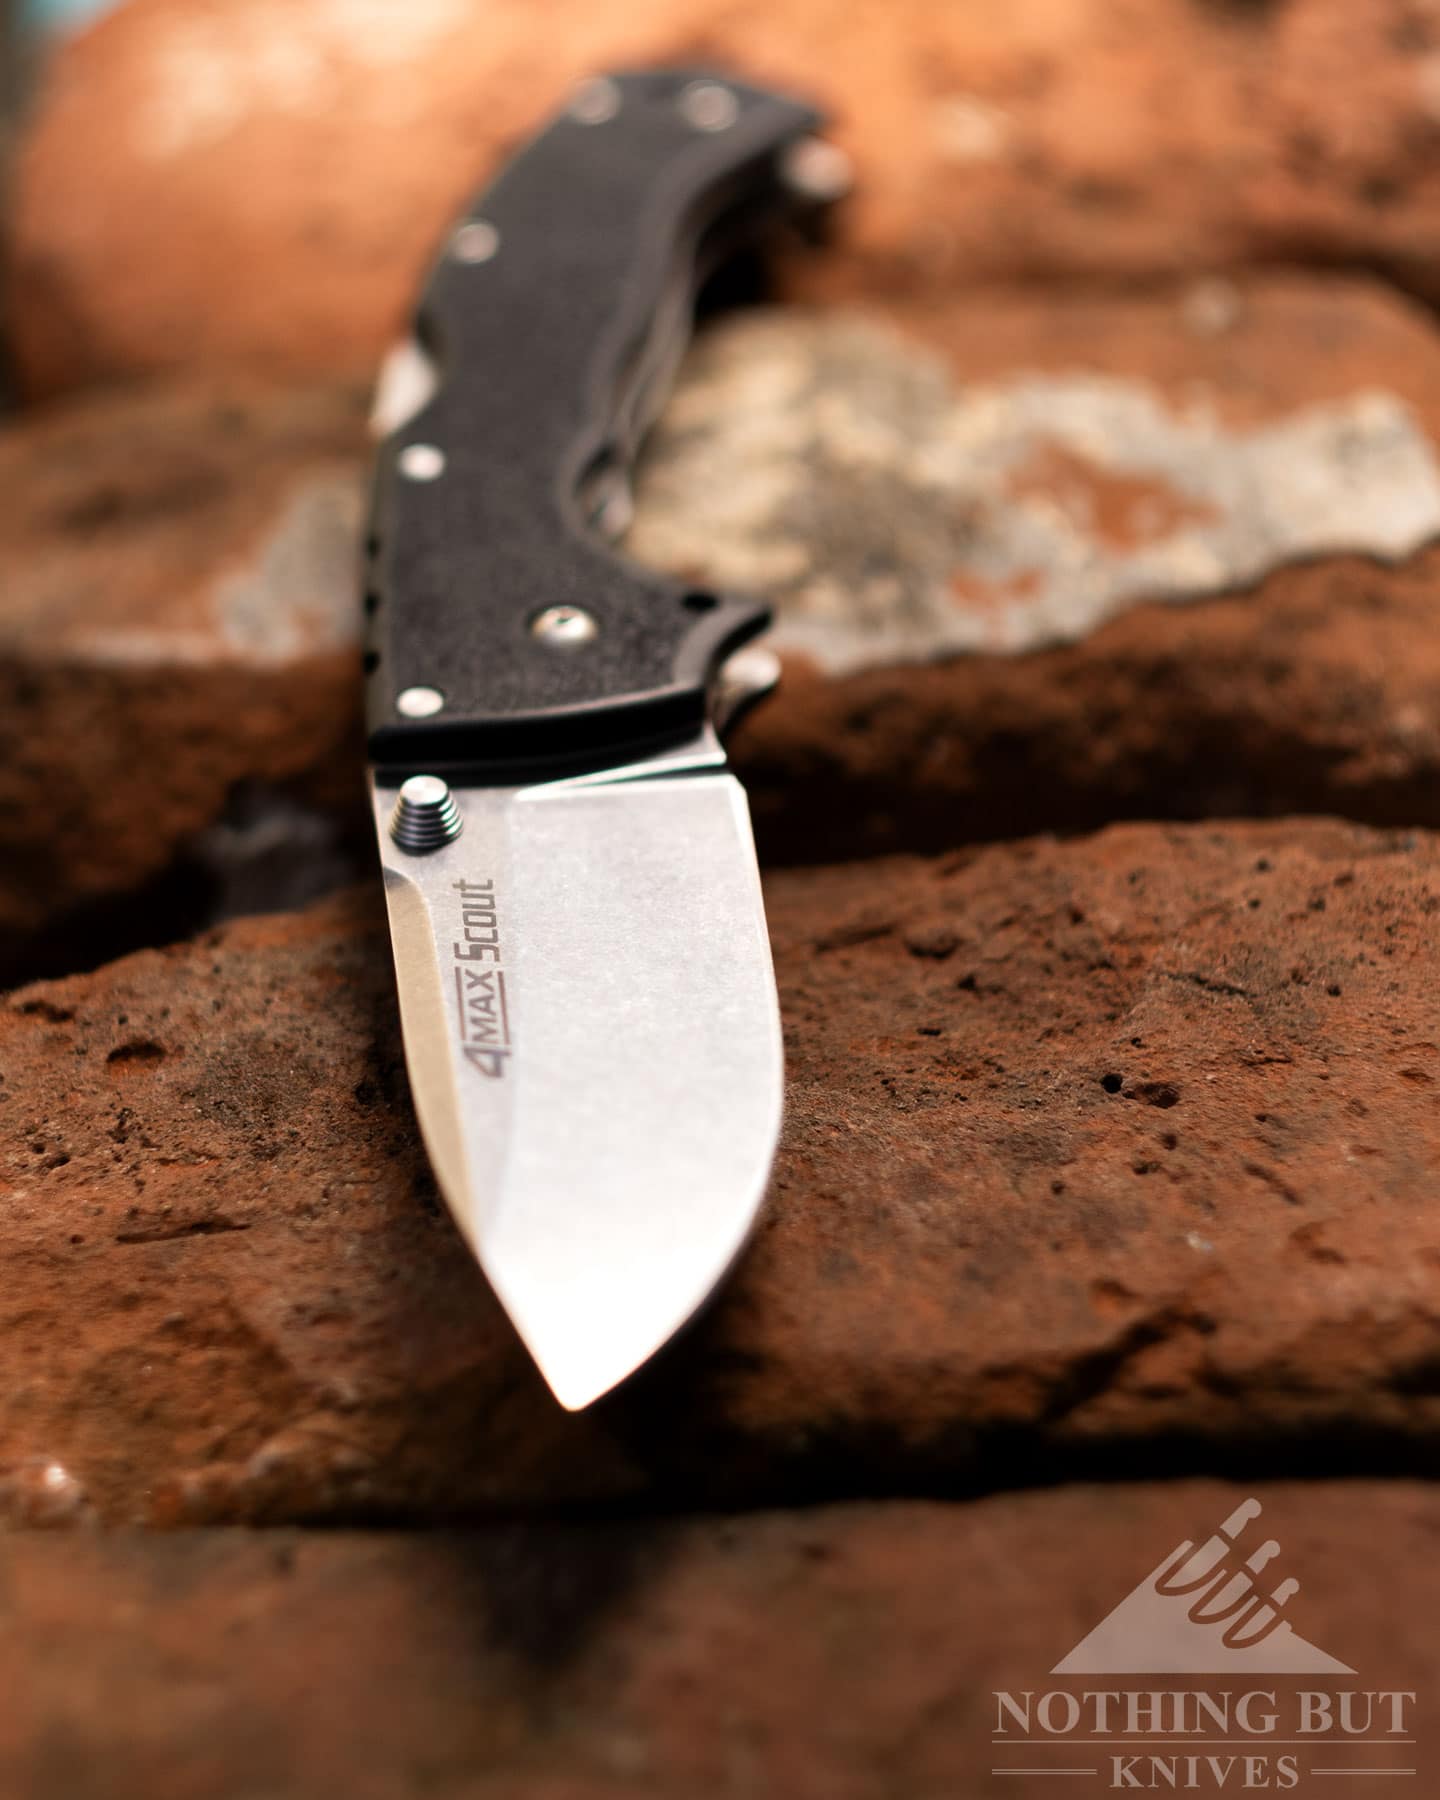 A close-up of the Cold Steel 4-MAX Scout folding knife in the open position with the tip of the blade facing forward.